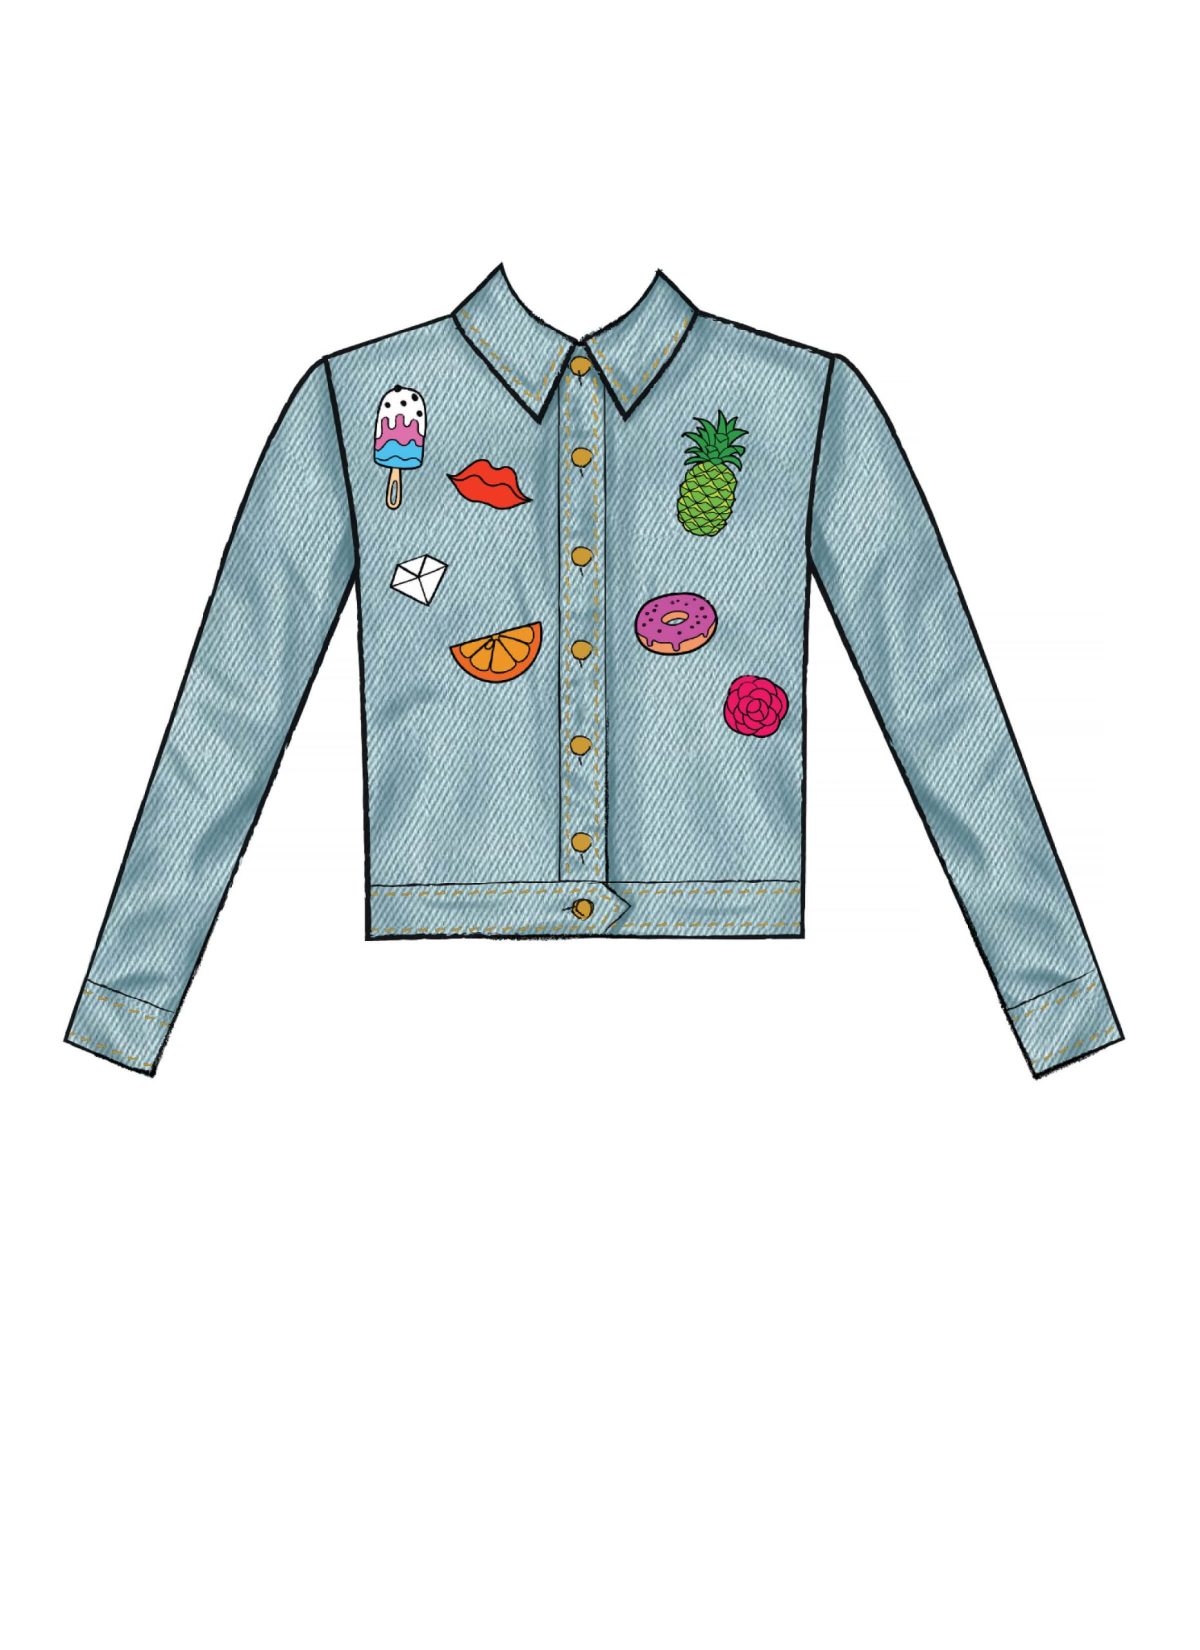 McCall's Sewing Pattern M8011 Misses' Jackets